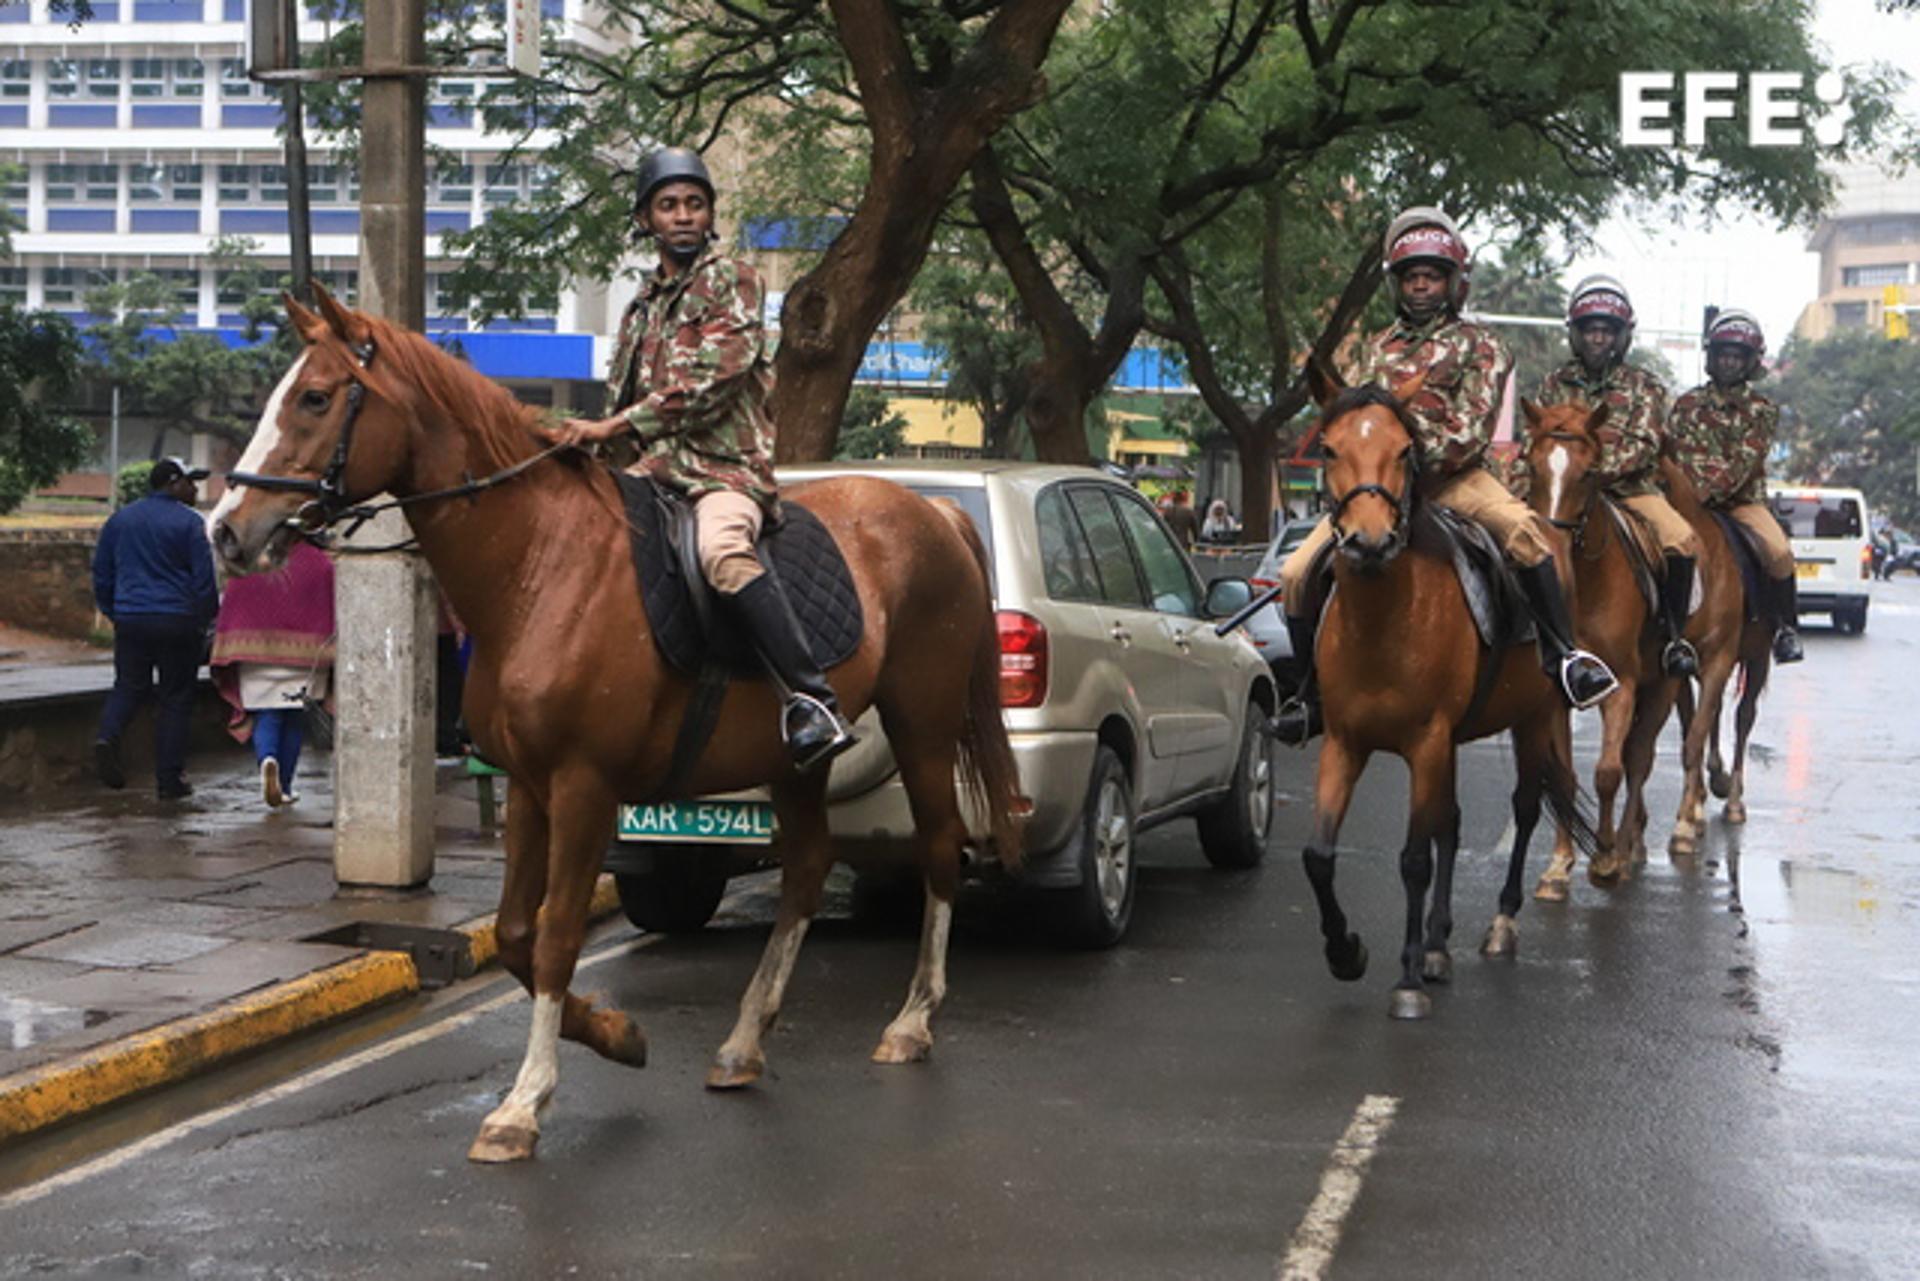 Kenyan mounted police patrol the central business district during a rally against tax increases in Nairobi on 7 July 2023. EFE/EPA/STRINGER
